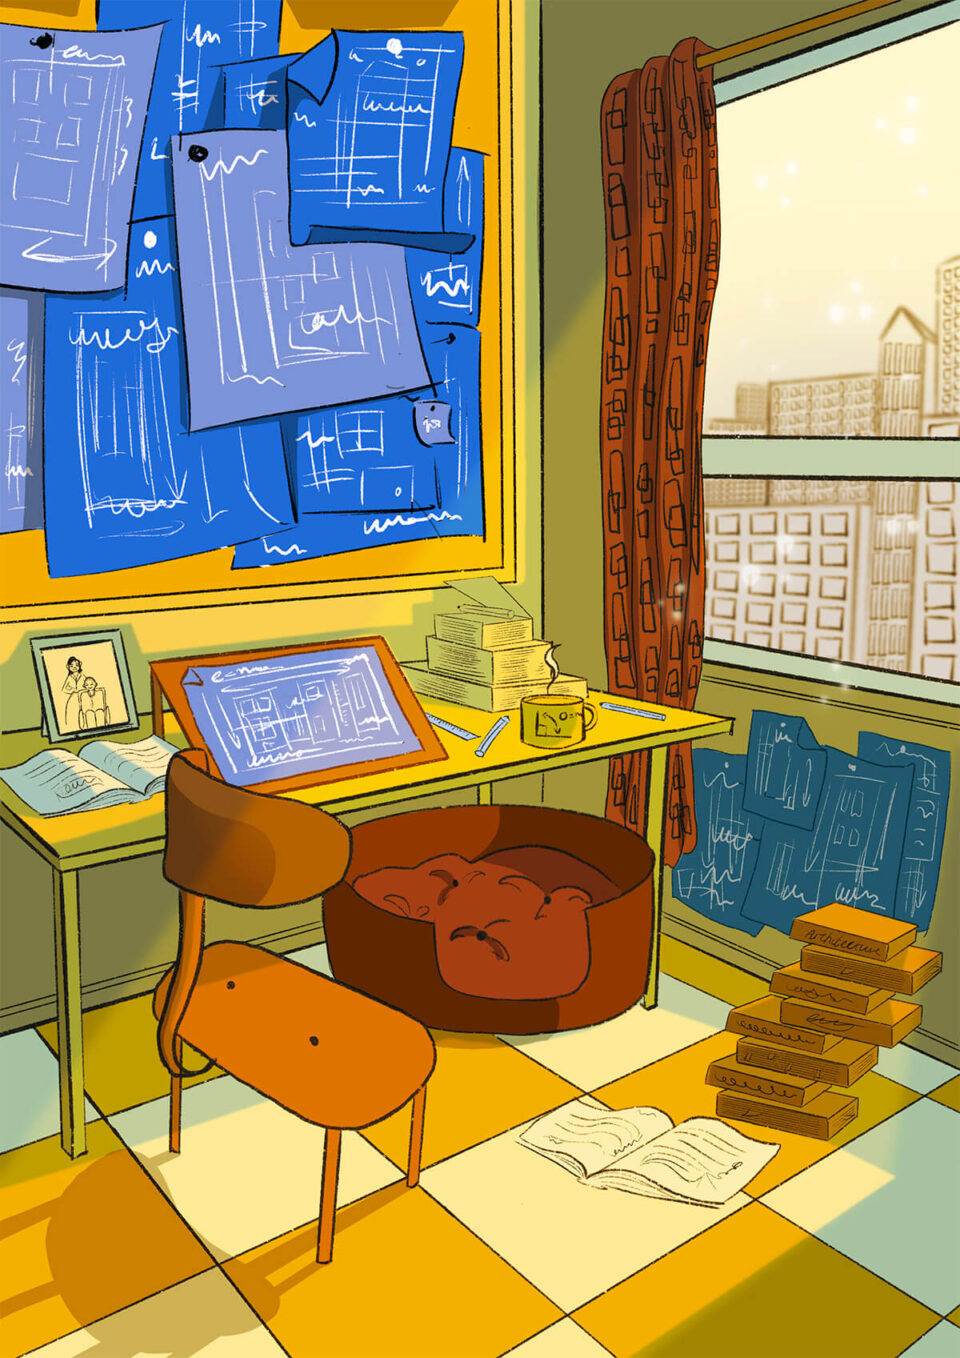 'Audrey's office' World Building by Emily Freya Illustration